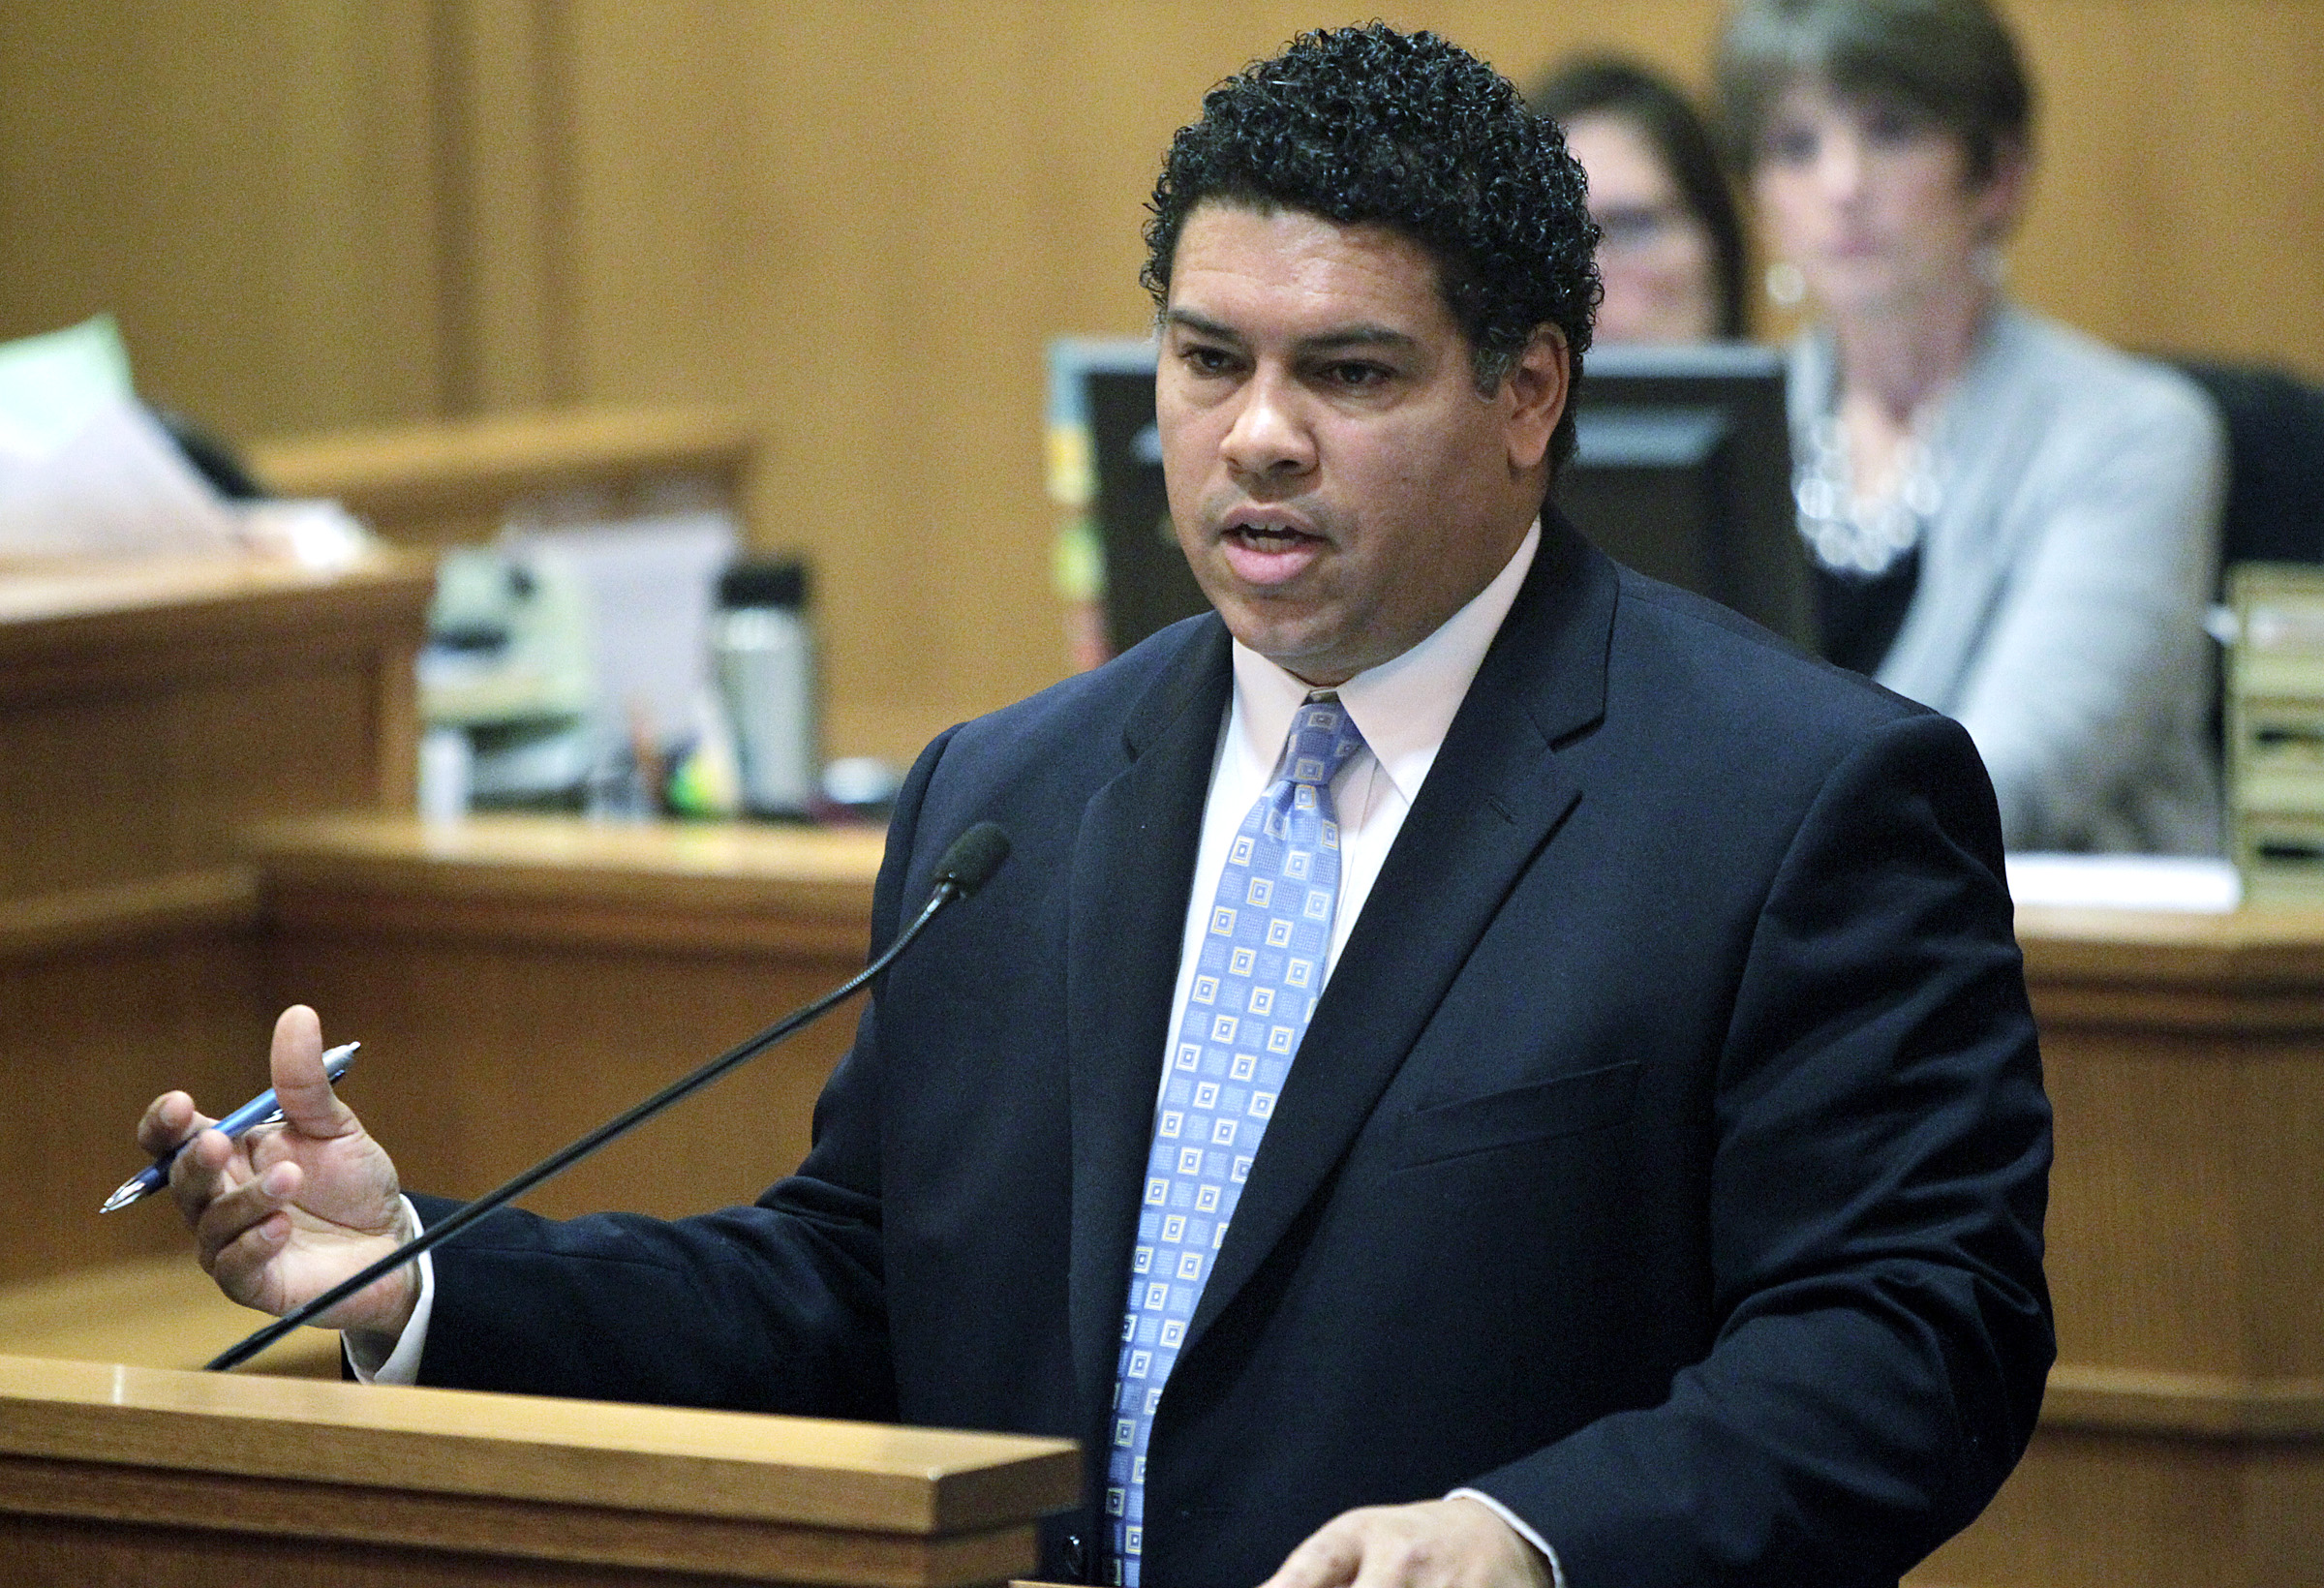 In this Feb. 26, 2013 file photo, Dane County, Wisconsin, District Attorney Ismael Ozanne speaks in a  Madison, Wis., court. Ozanne is weighing whether to file charges against Madison Officer Matt Kenny in Tony Robinsons death.